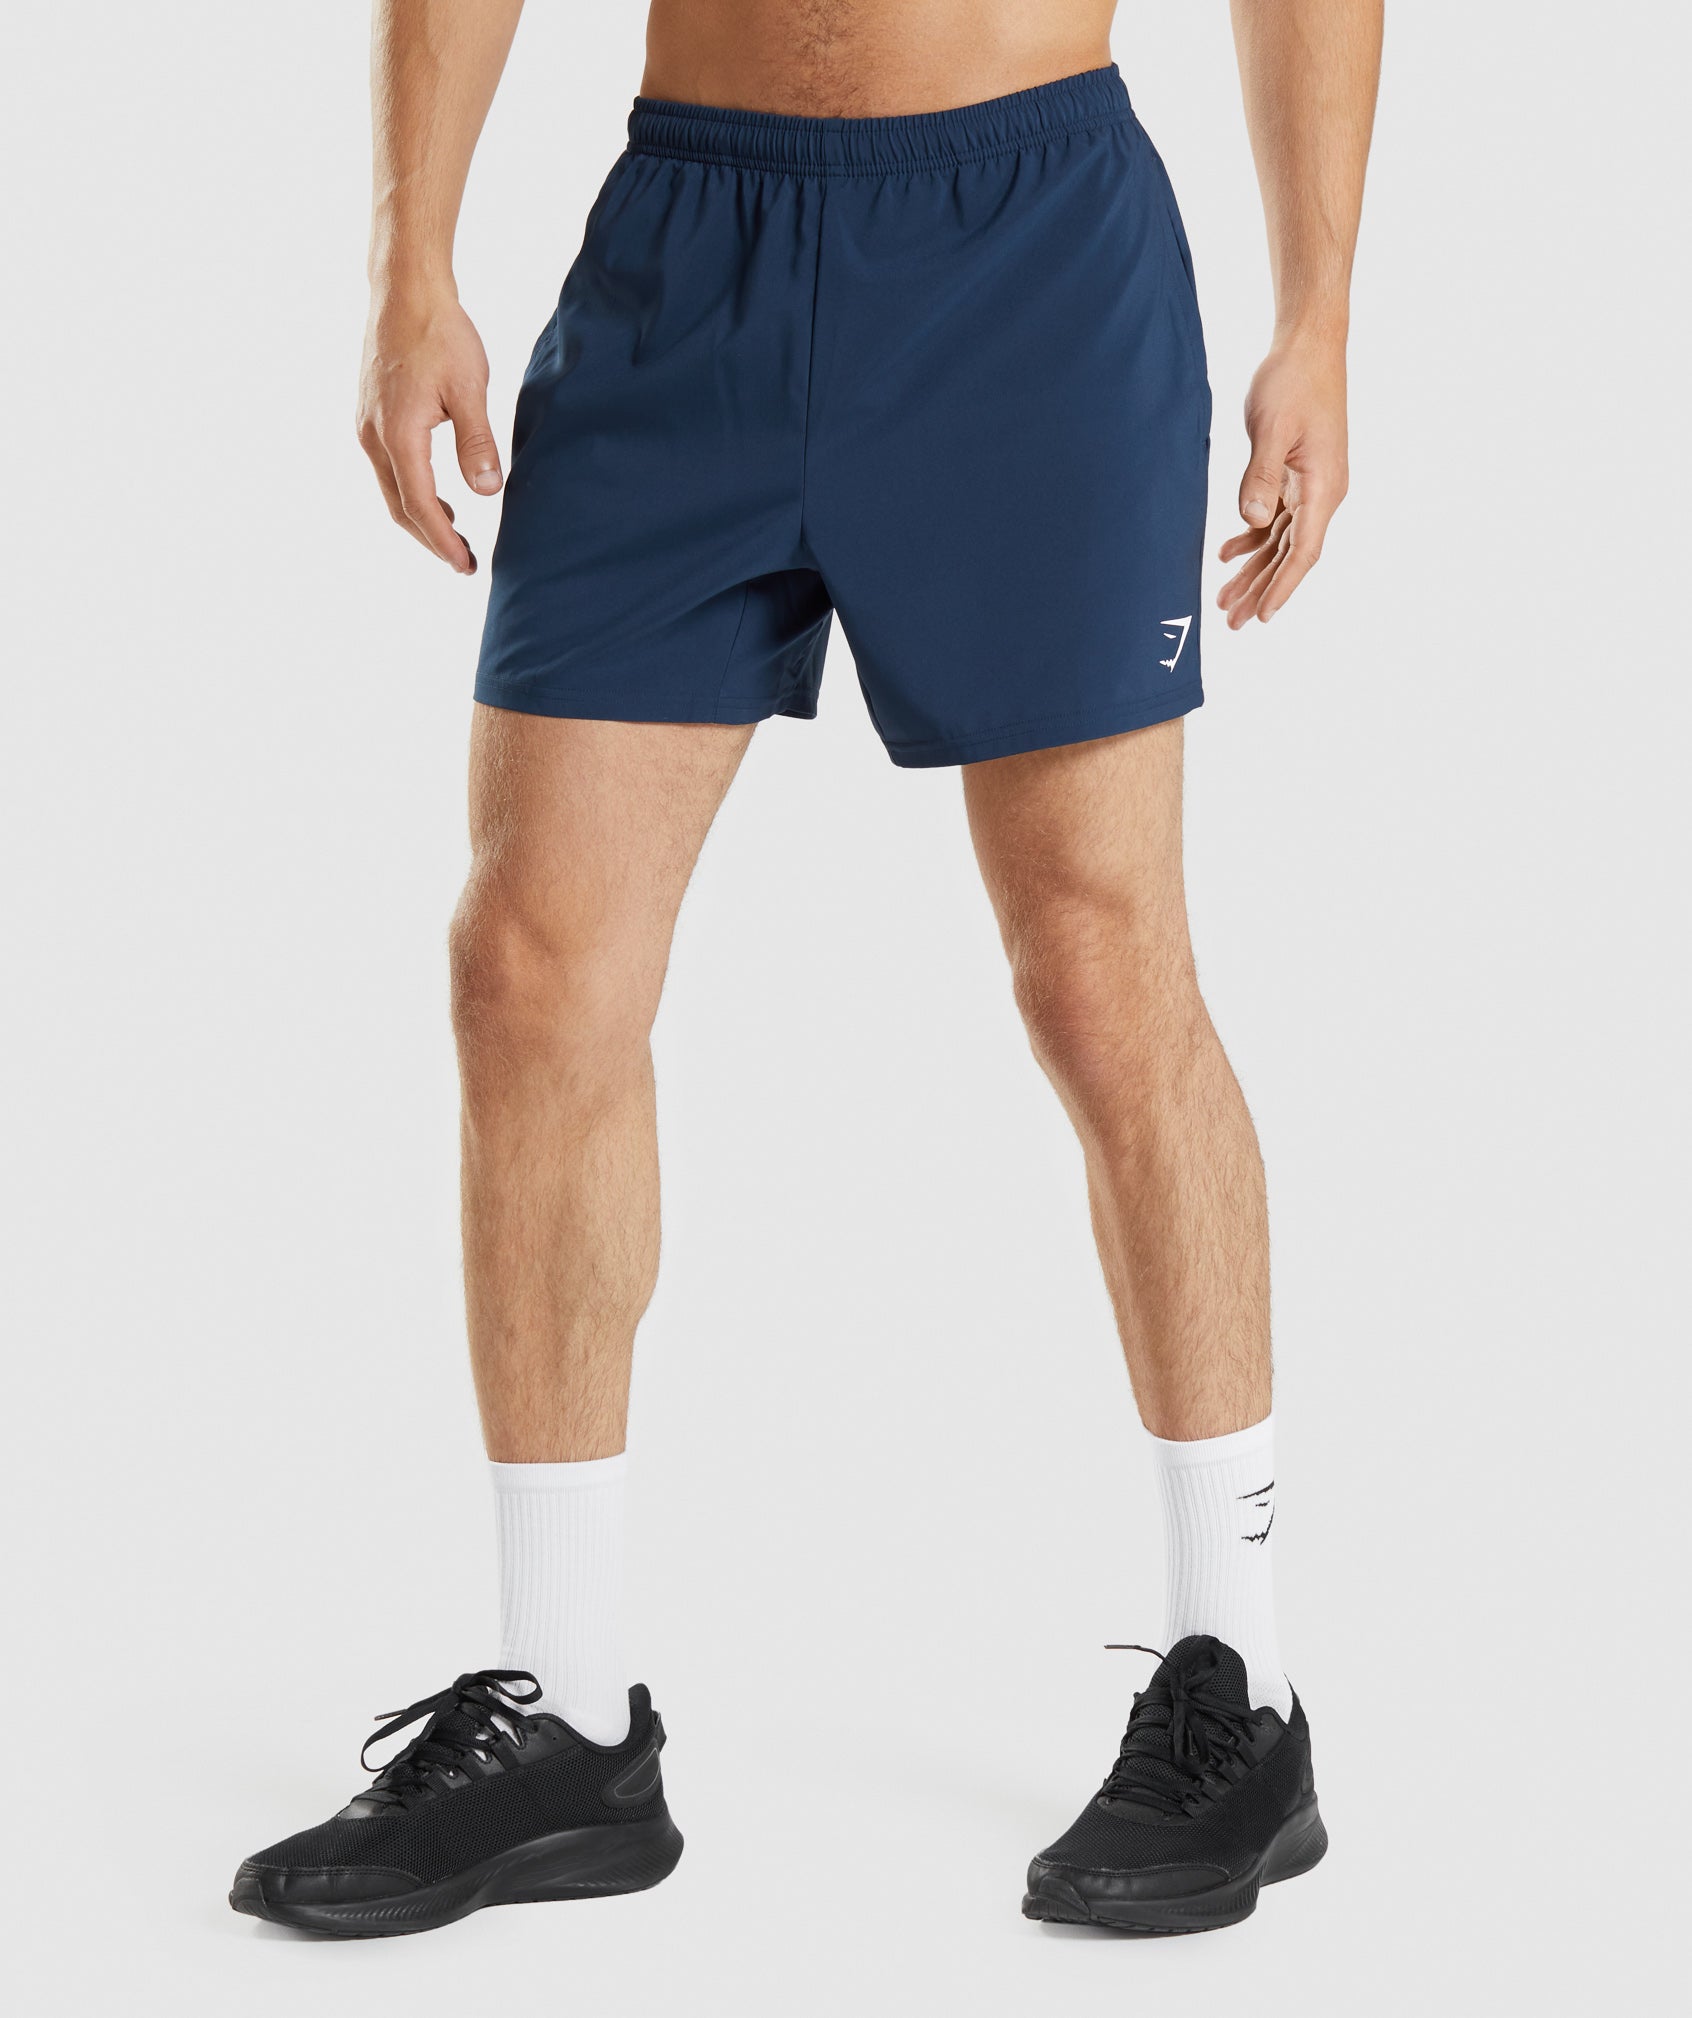 Gymshark Heather Dual Band Short Size Small Evening Navy Blue Marl - $42  (12% Off Retail) New With Tags - From Erika